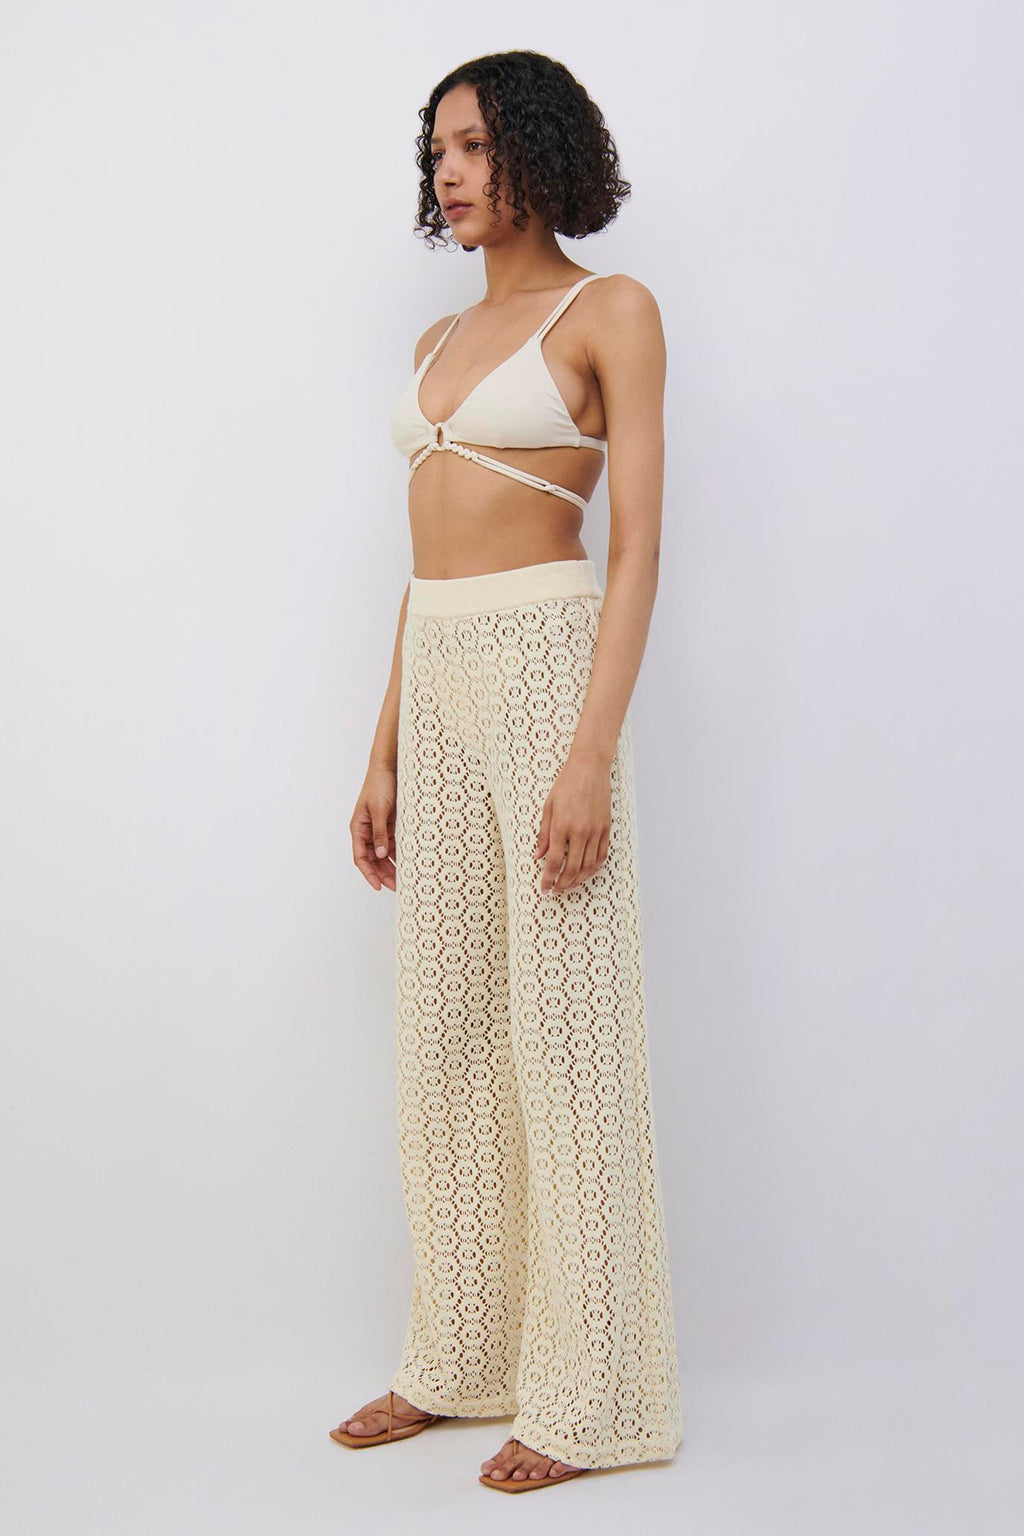 Rayleigh Crochet Coverup Pant